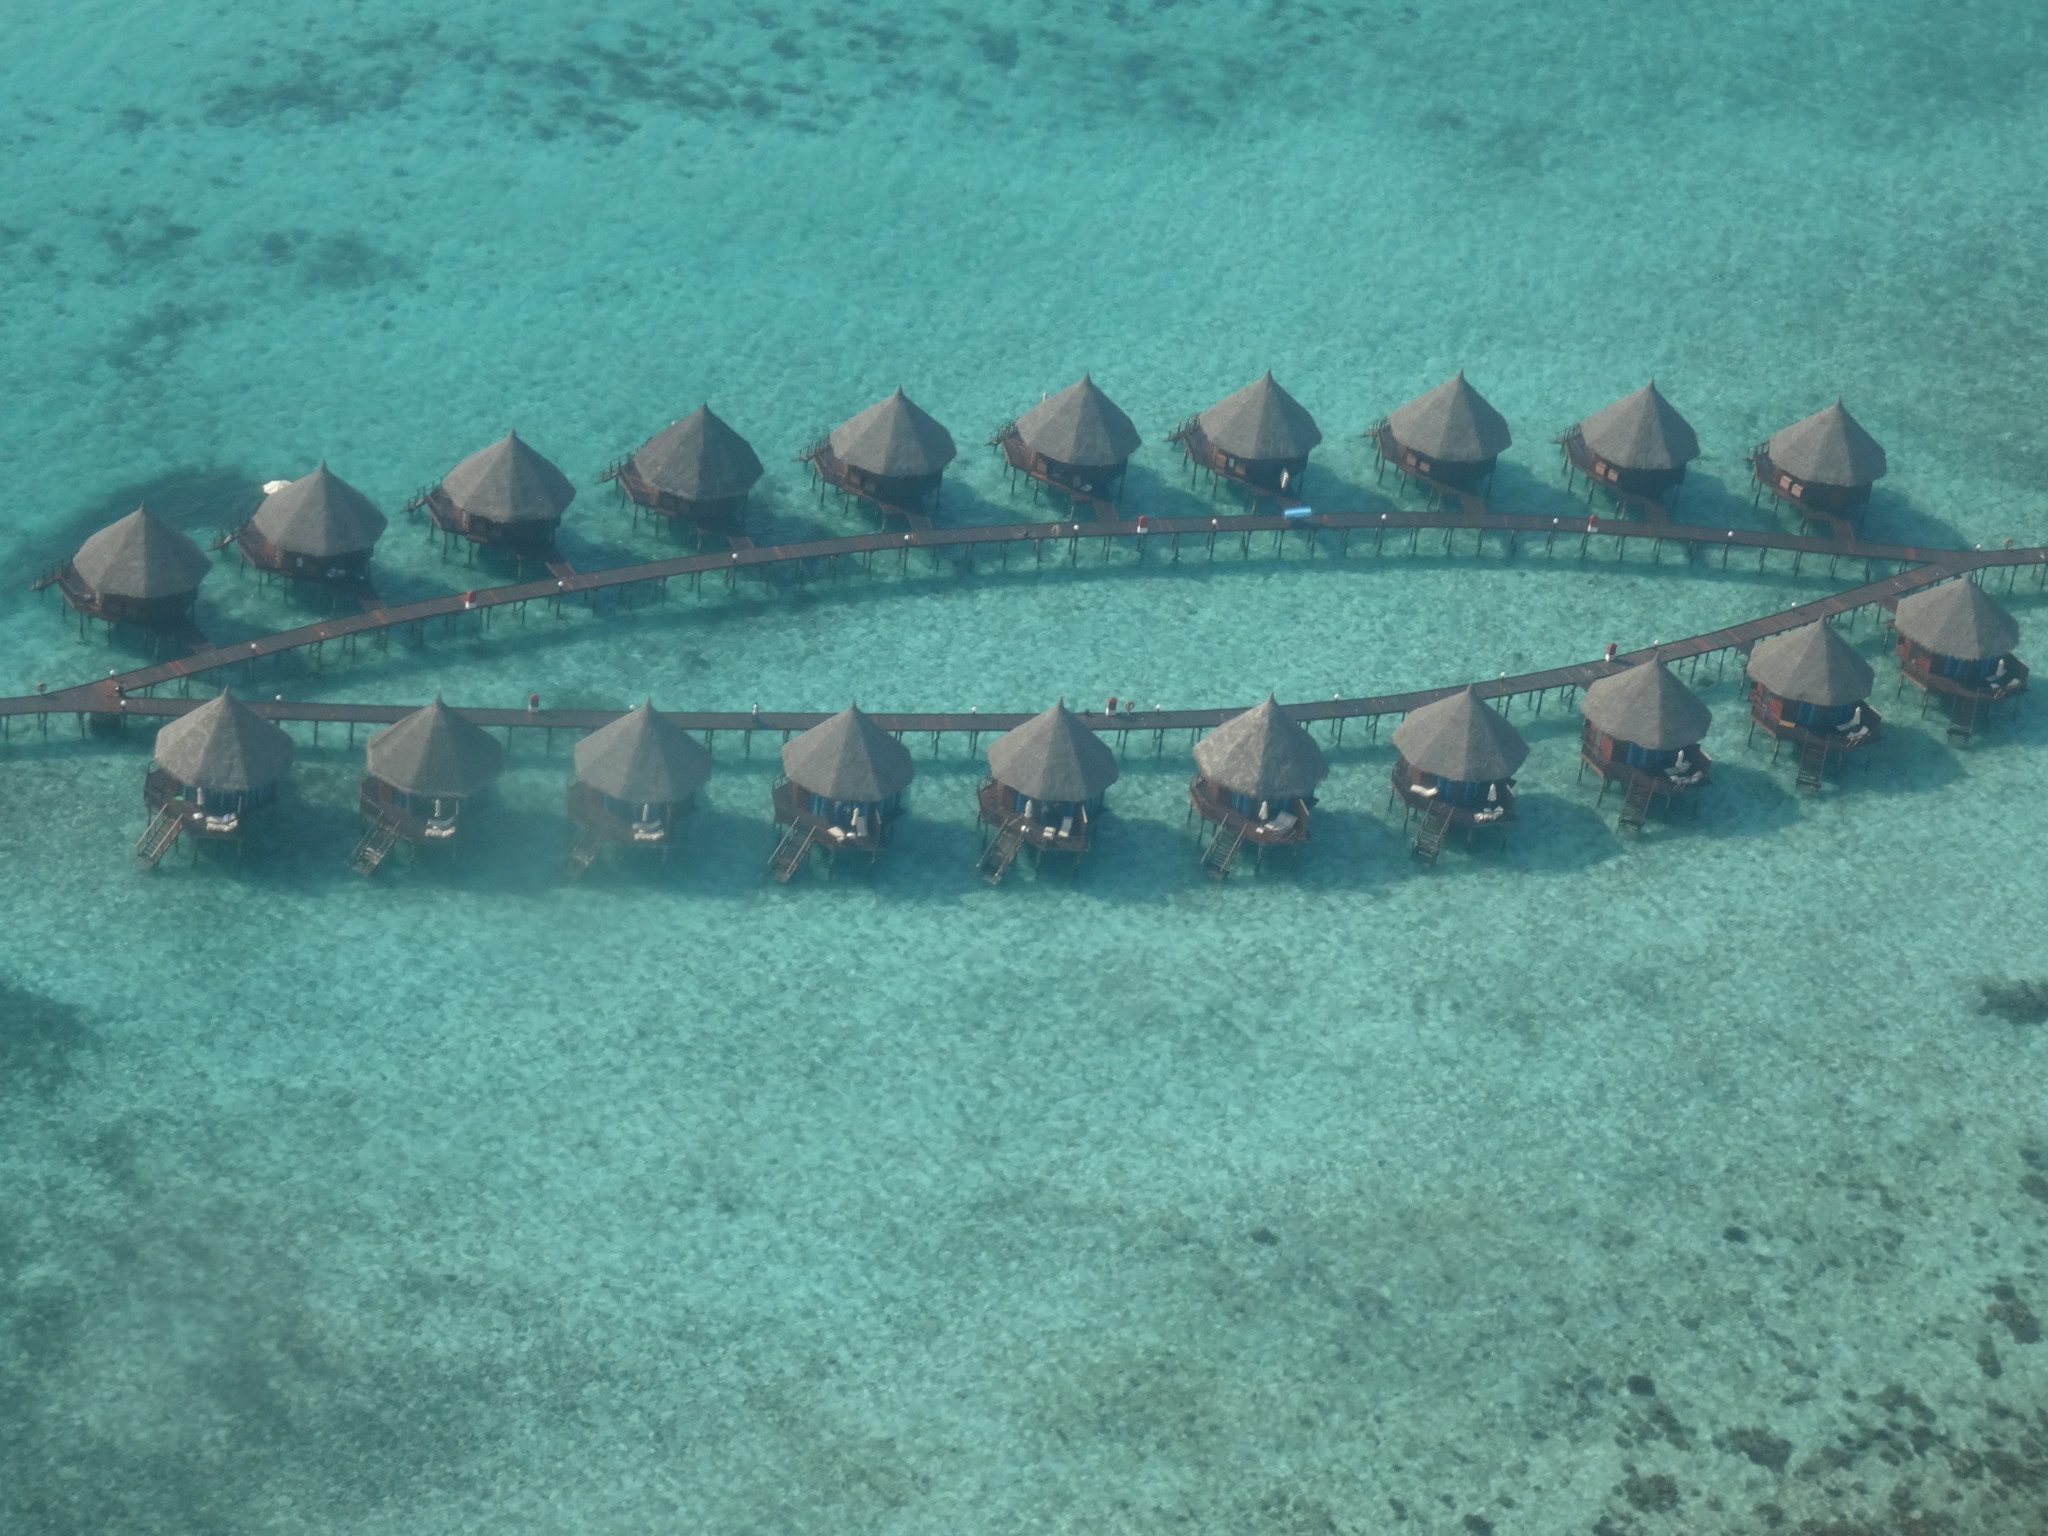 a group of huts on stilts in the water